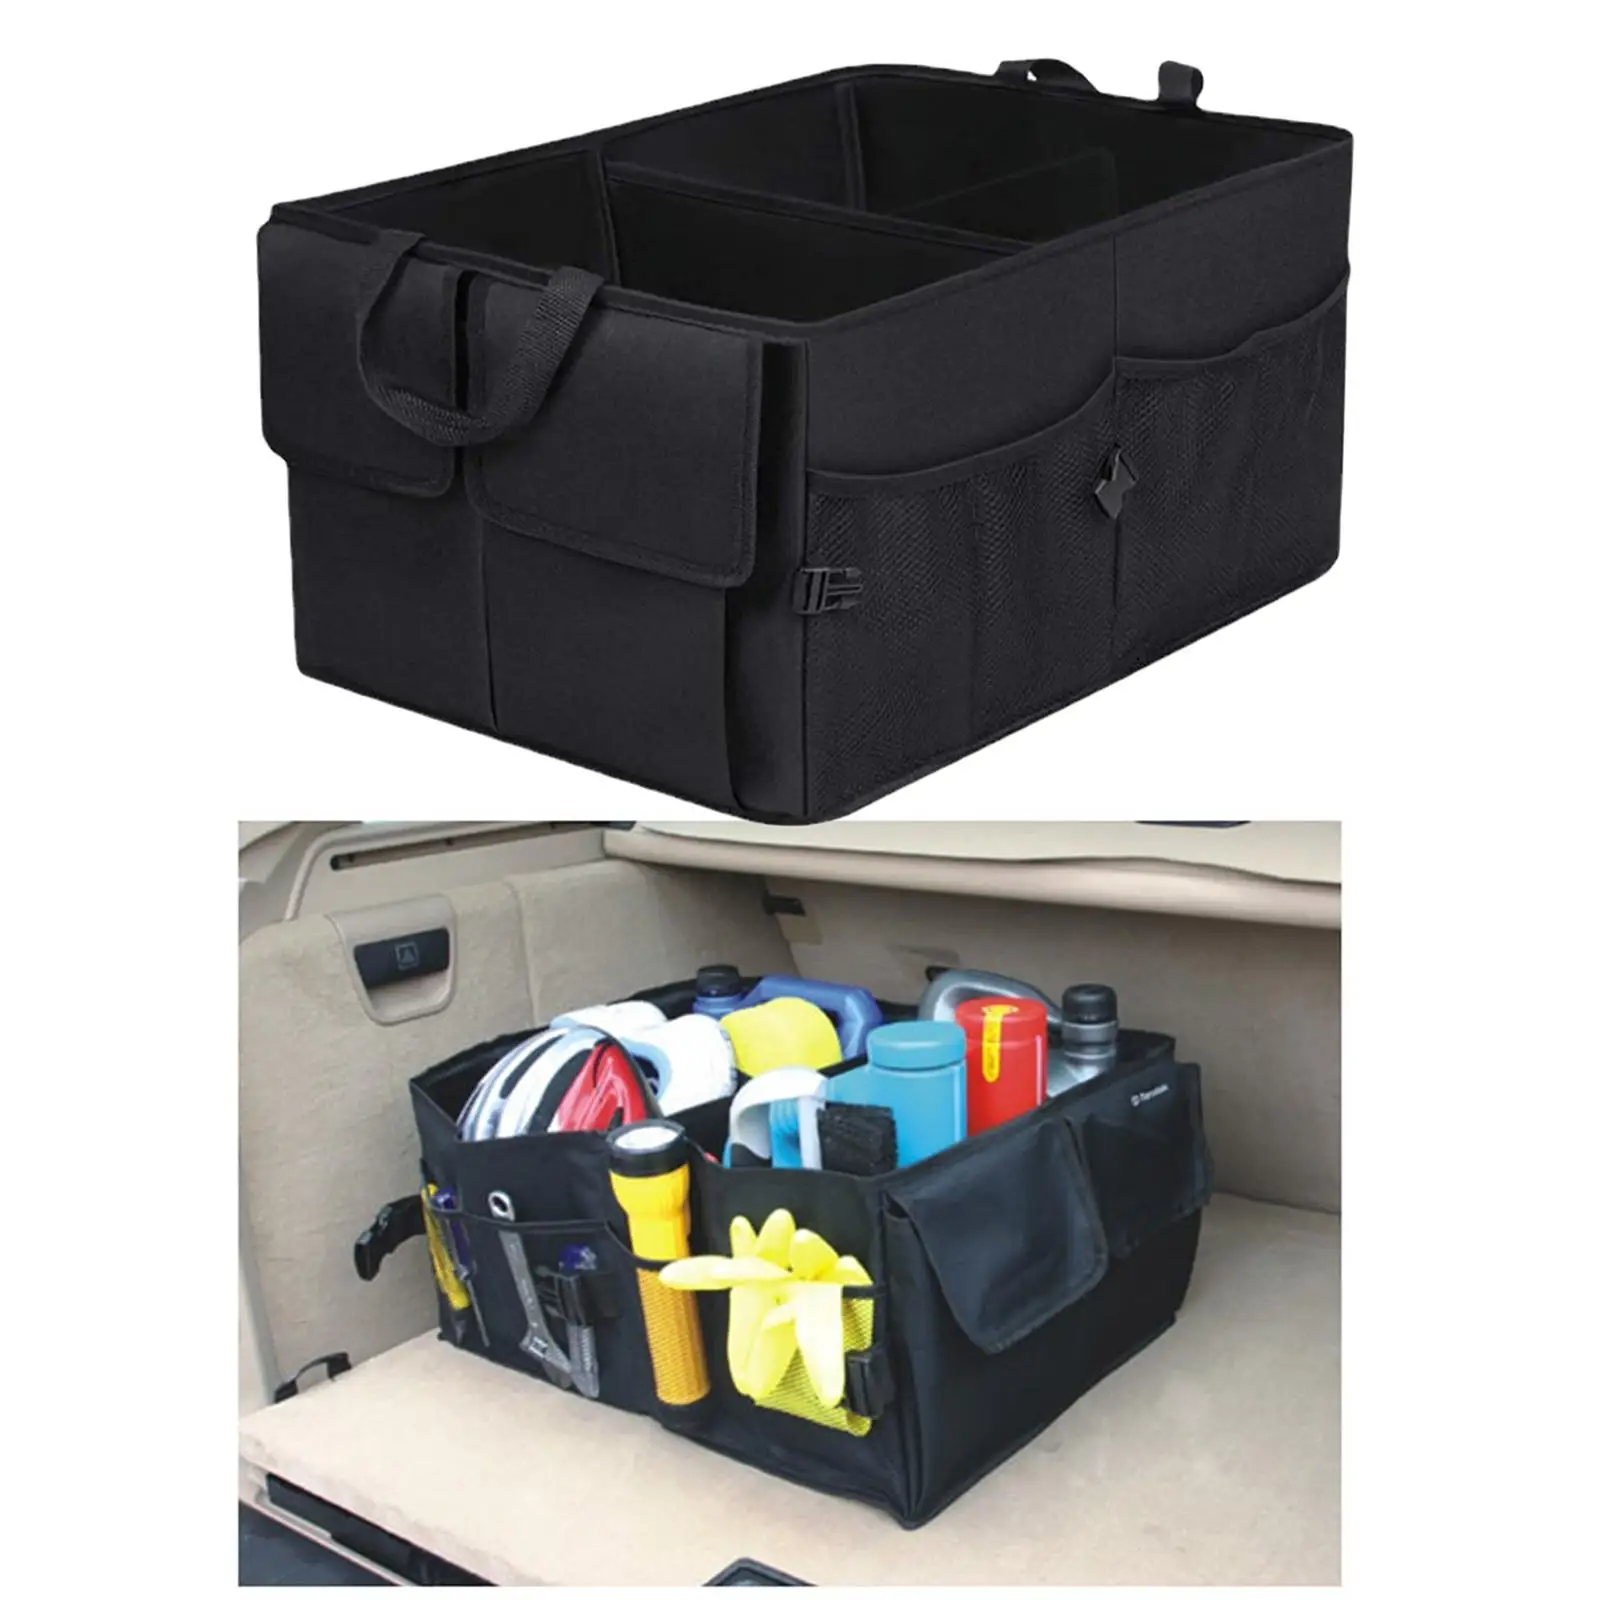 Premium Car Boot Organiser Foldable Tidy Storage Bag Trunk for Auto Luggage